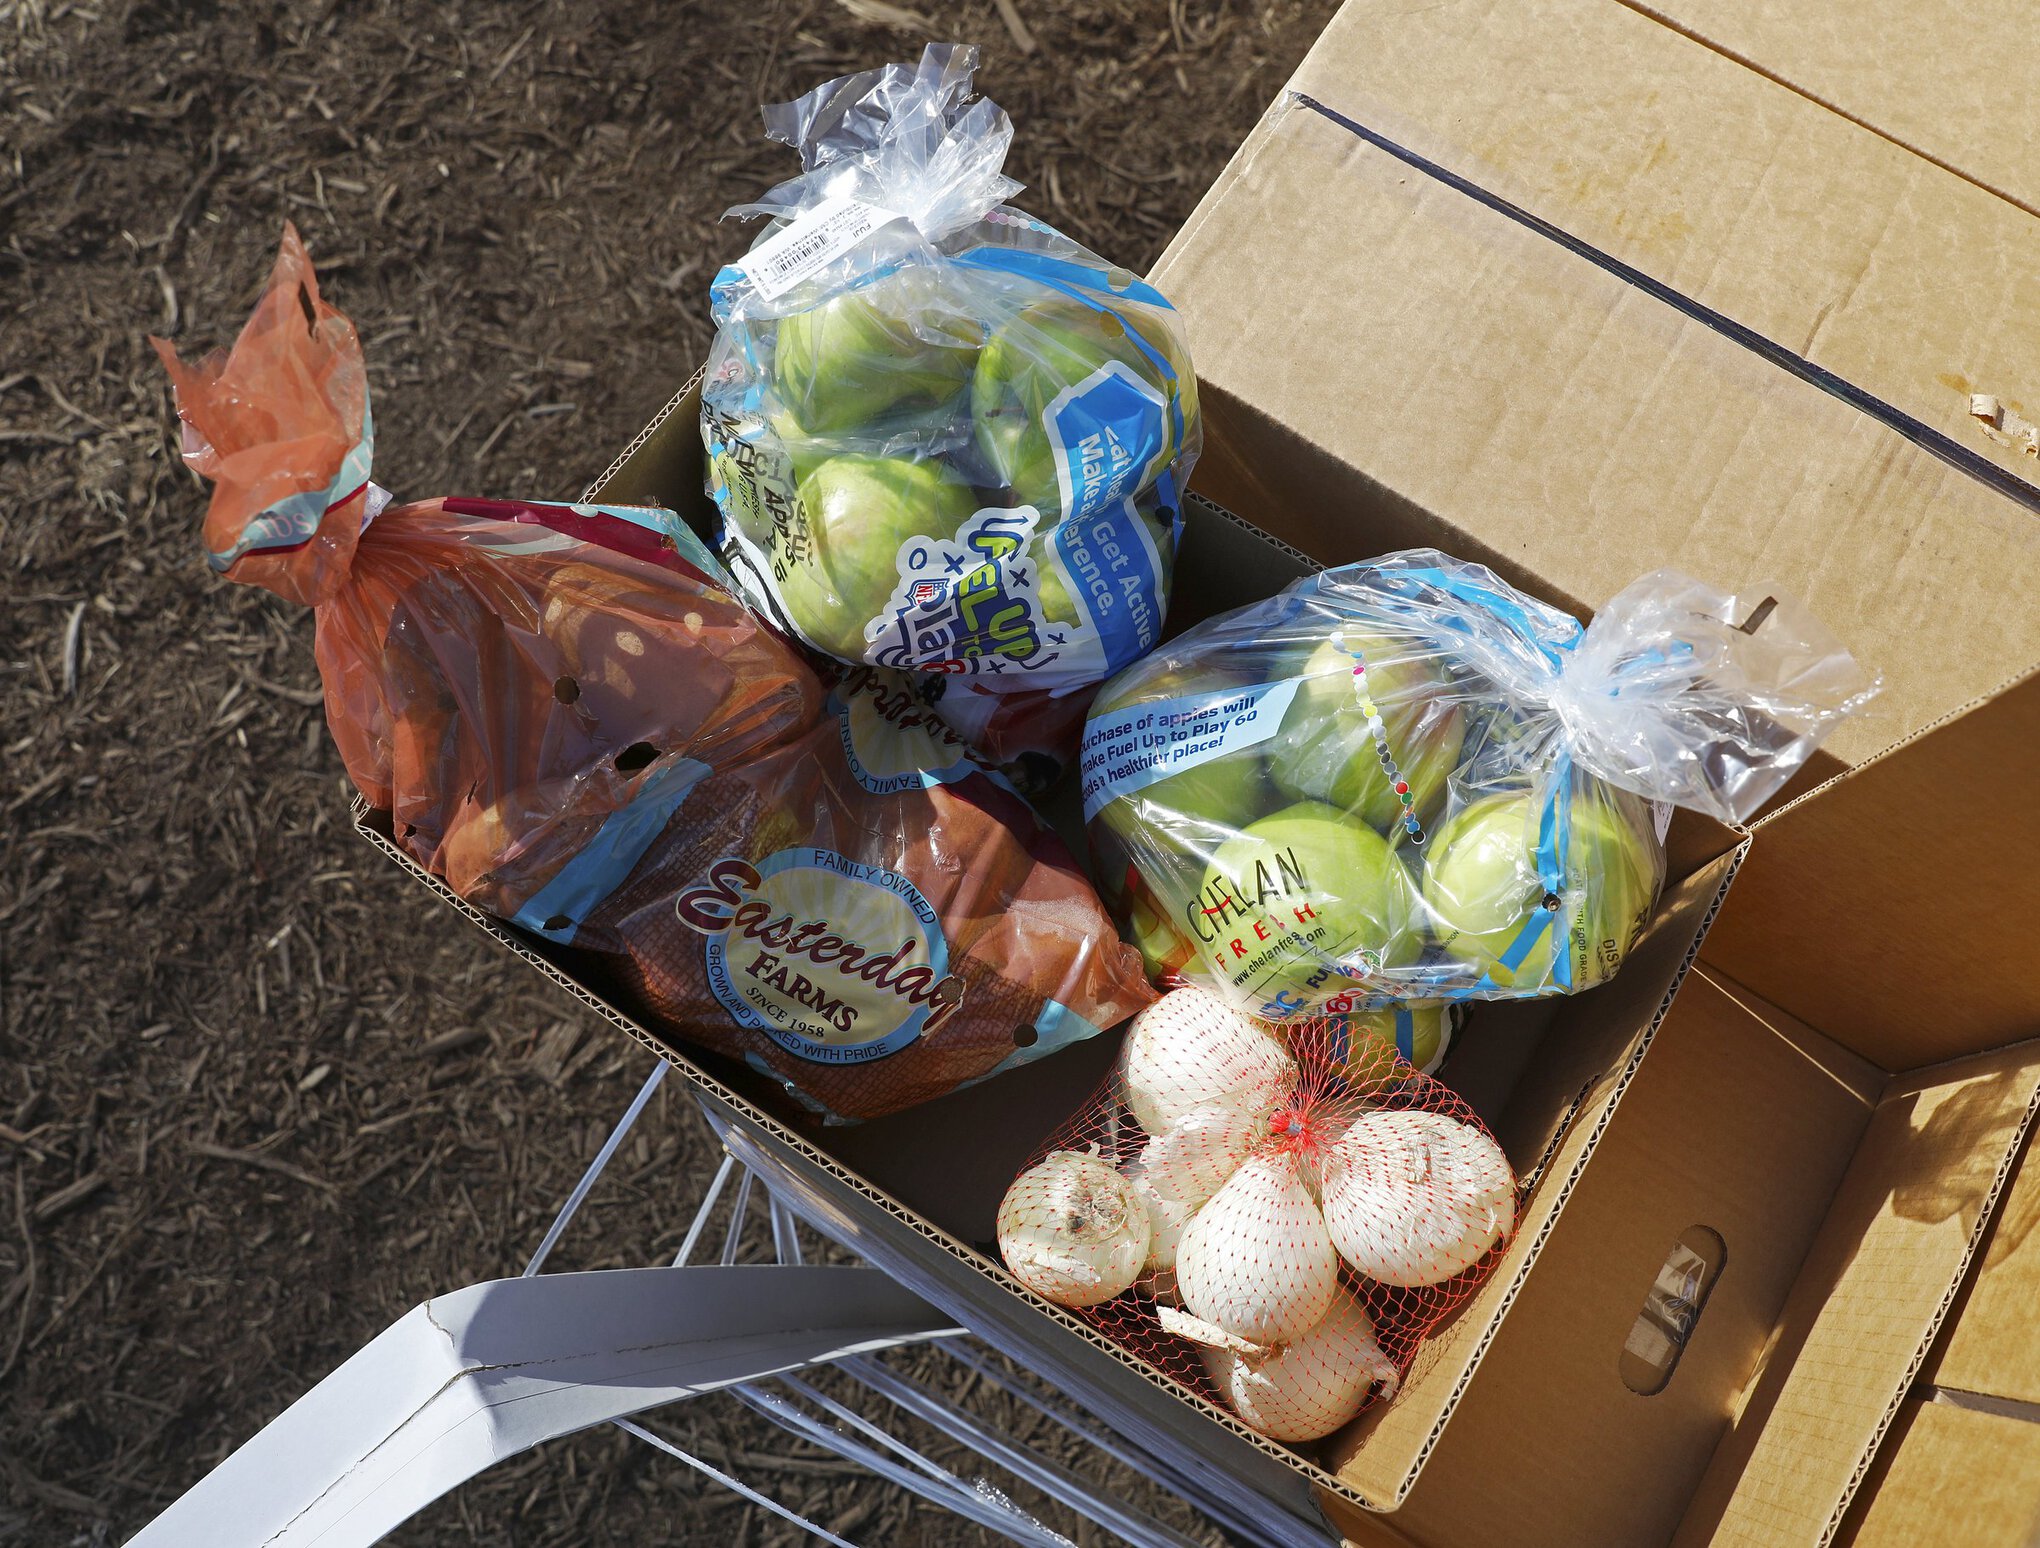 EastWest Food Rescue has delivered 2.3 million pounds of crops to more than 160 food banks.